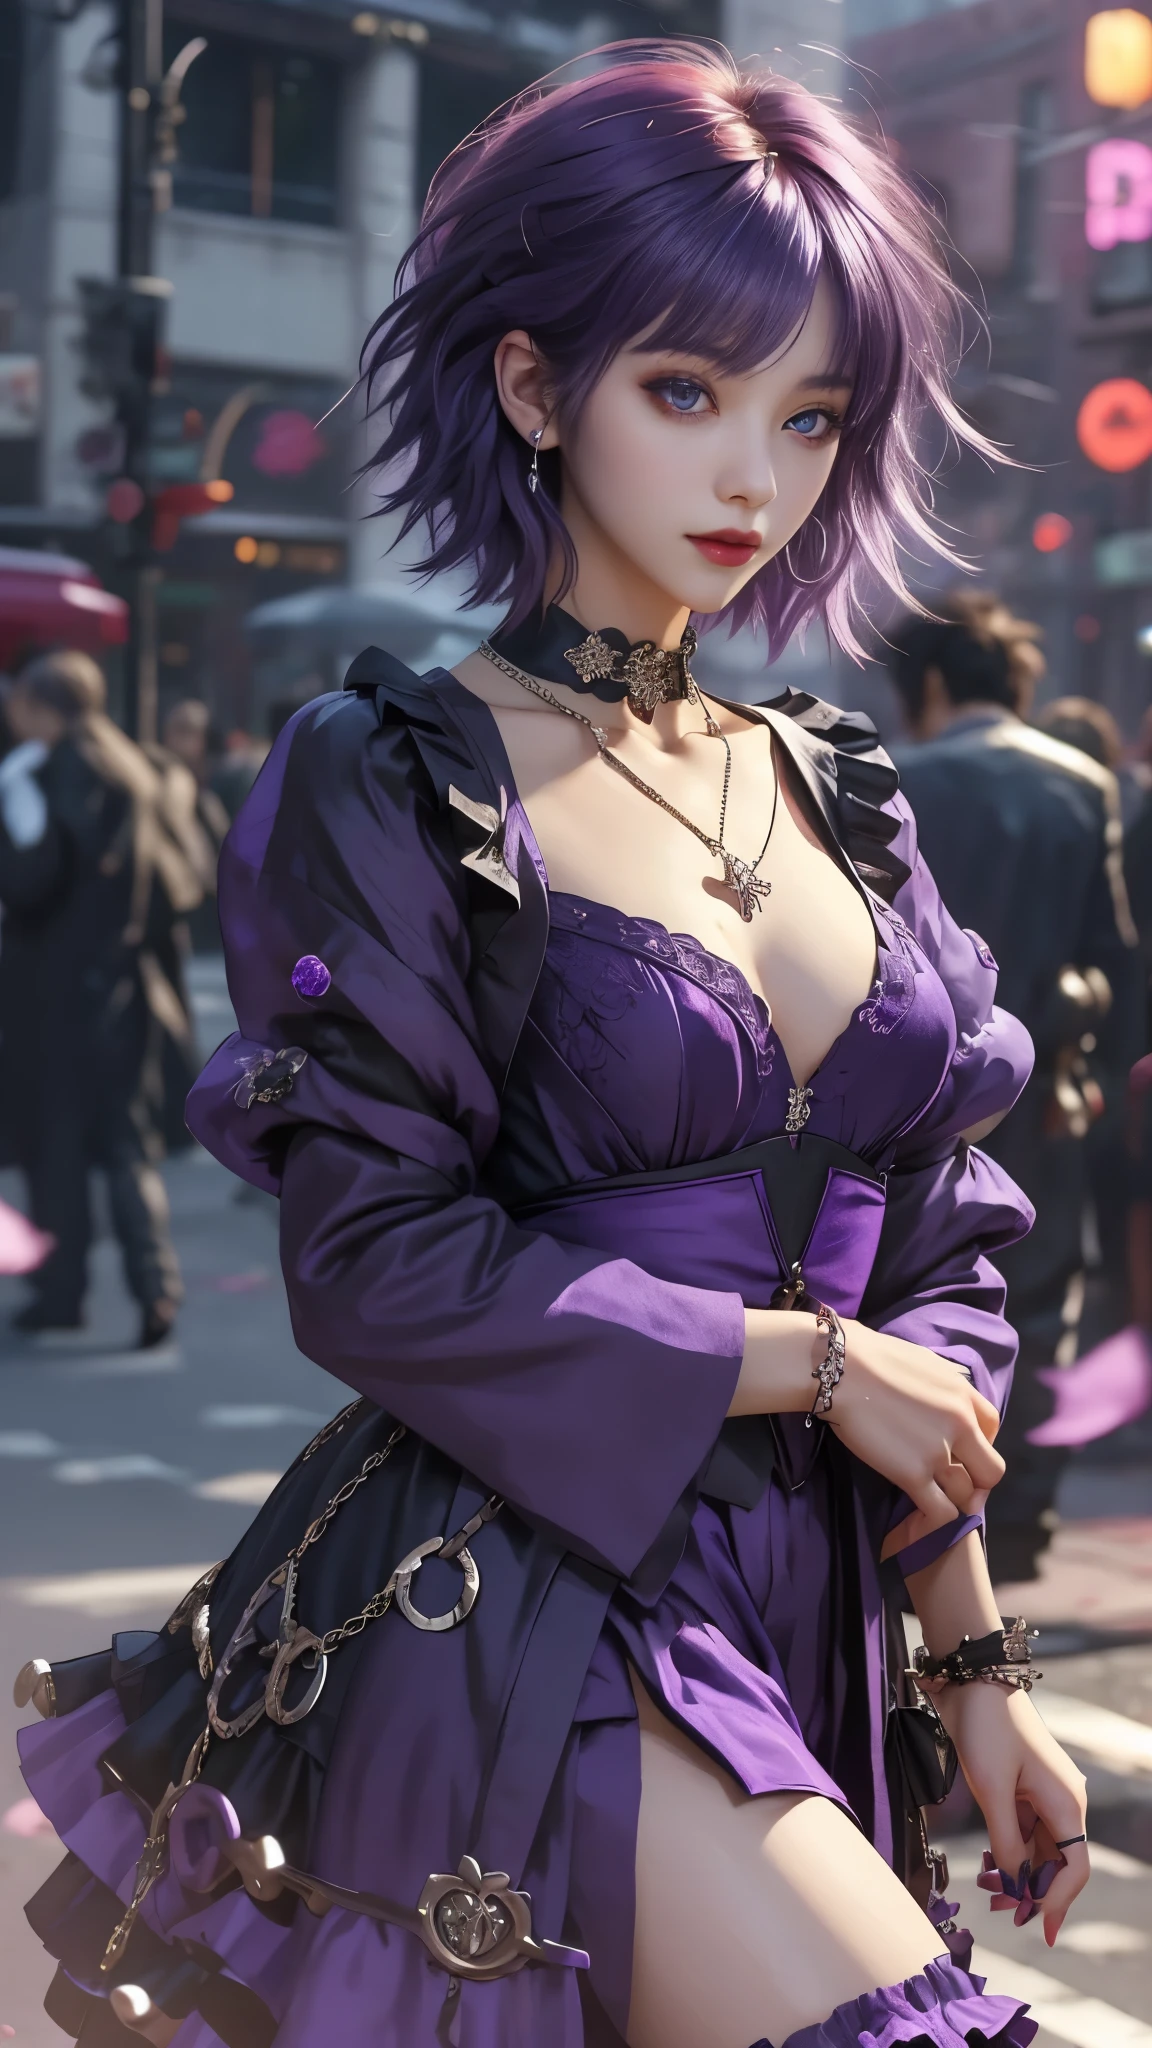 ​masterpiece, top-quality, ((1womanl)), different purple color, finely eye and detailed face, intricate detailes, Casual black and purple attire, window, A smile, Happiness, tenderness, high-level image quality、selfee, Beautuful Women、tall、a small face, D-cups, The upper part of the body、nightfall, nighttime scene、𝓡𝓸𝓶𝓪𝓷𝓽𝓲𝓬、Korea person, Idol Photos, Model photo, k pop, Professional Photos, Vampires, Korean fashion in black and purple, Fedoman with necklace, inspired by Sim Sa-jeong, androgynous vampire, :9 detailed face: 8, extra detailed face, detailed punk hair, ((eyes are deialed)) baggy eyes, Seductive. Highly detailed, semi realistic anime, Vampires, hyperrealistic teen, Delicate androgynous princess, imvu, ((short hair woman)), purple hair woman with wild look, ((Woman with short purple hair)), ((1 persons)),